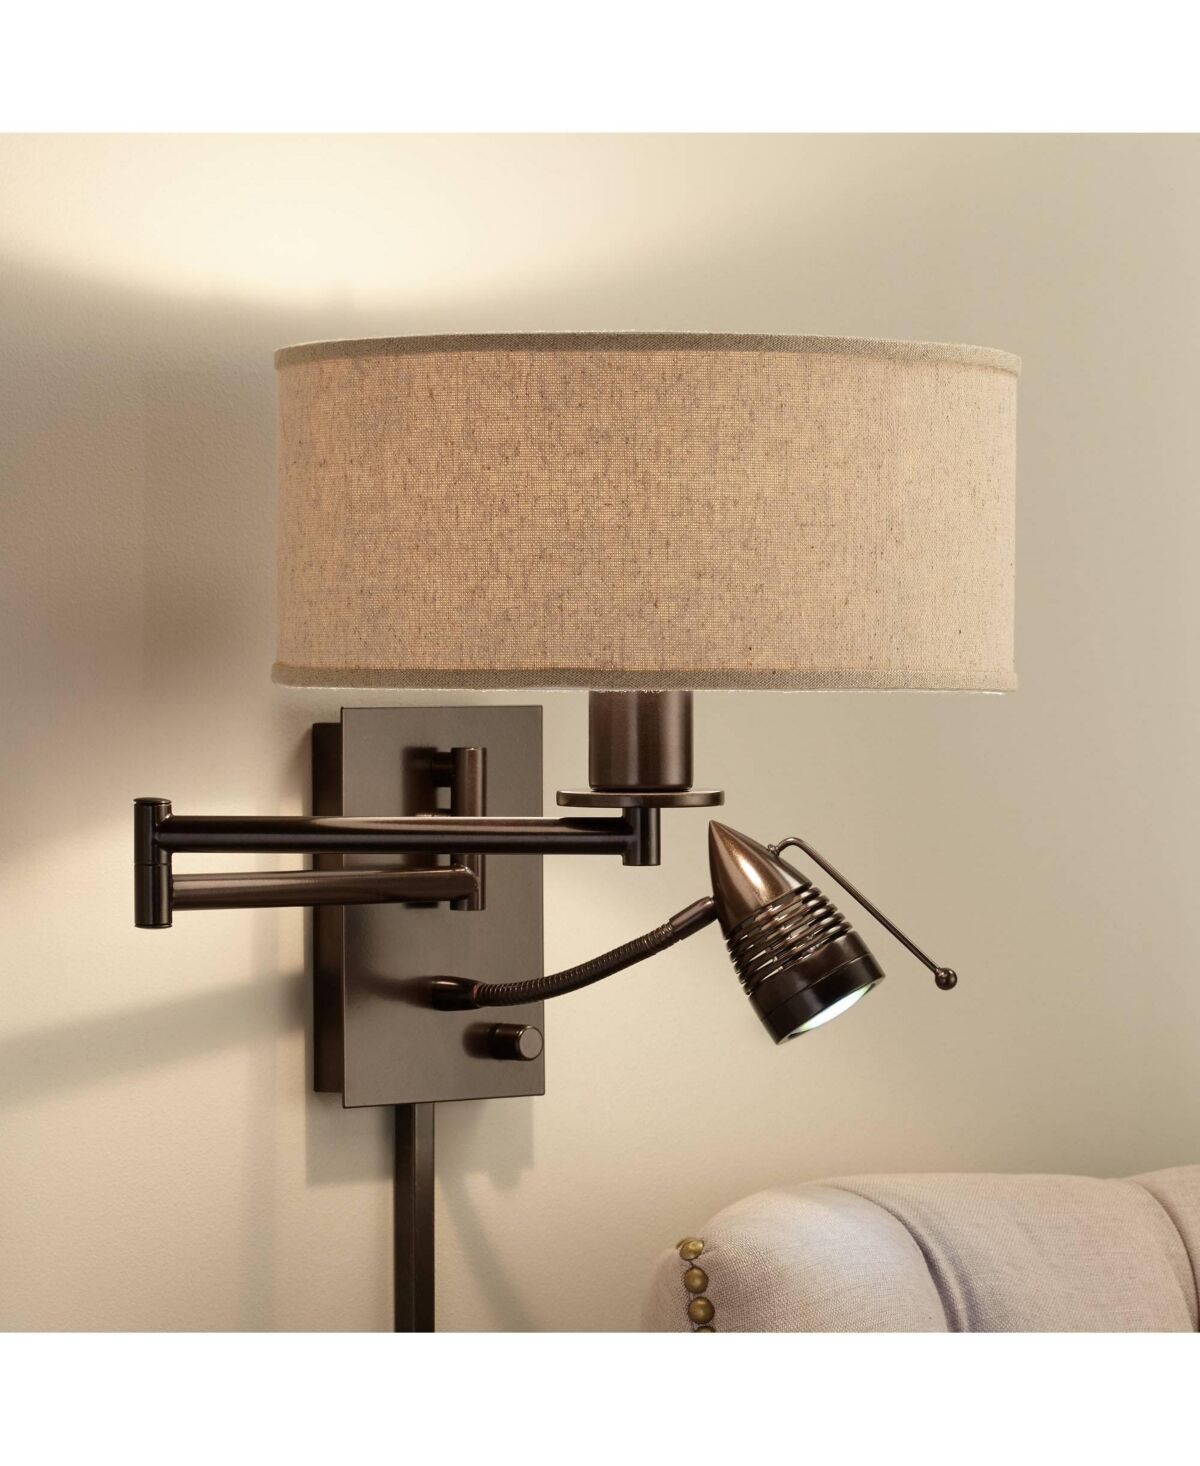 Possini Euro Design Radix Modern Swing Arm Adjustable Wall Lamp With Cord Led Bronze Plug-In Light Fixture Oatmeal Fabric Drum Shade Bedroom Bedside House Reading Living